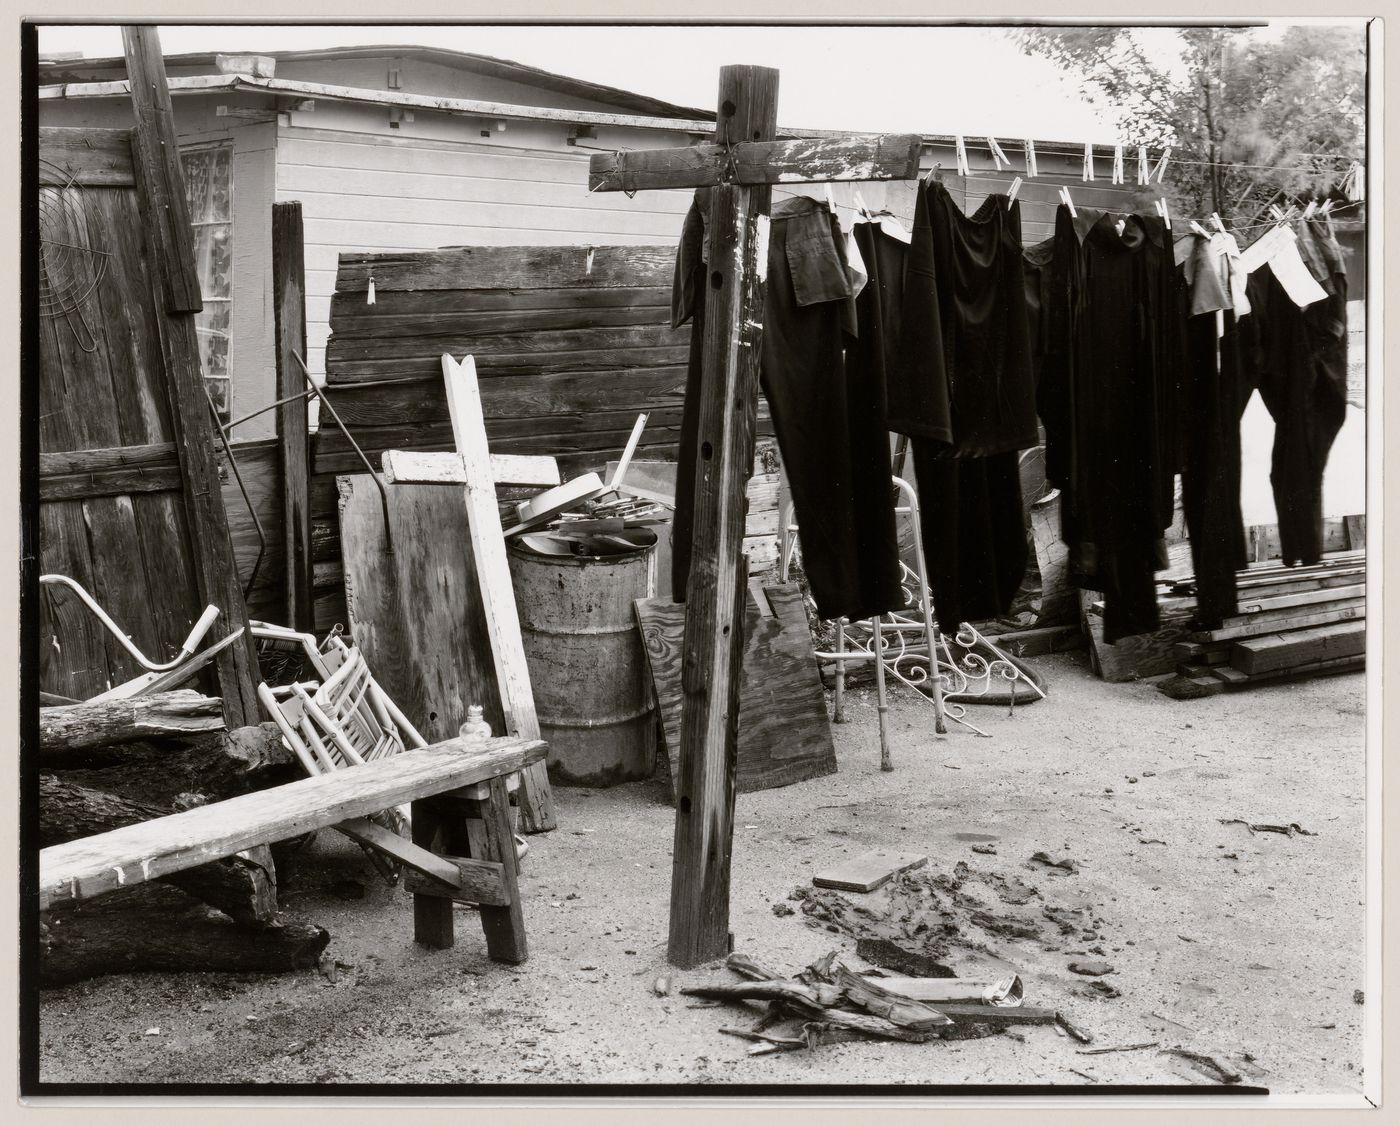 View of clothesline showing clothes drying with cross on the left, Old Pascua, Tucson, Arizona, United States (from a series documenting the Yaqui community of Old Pascua)